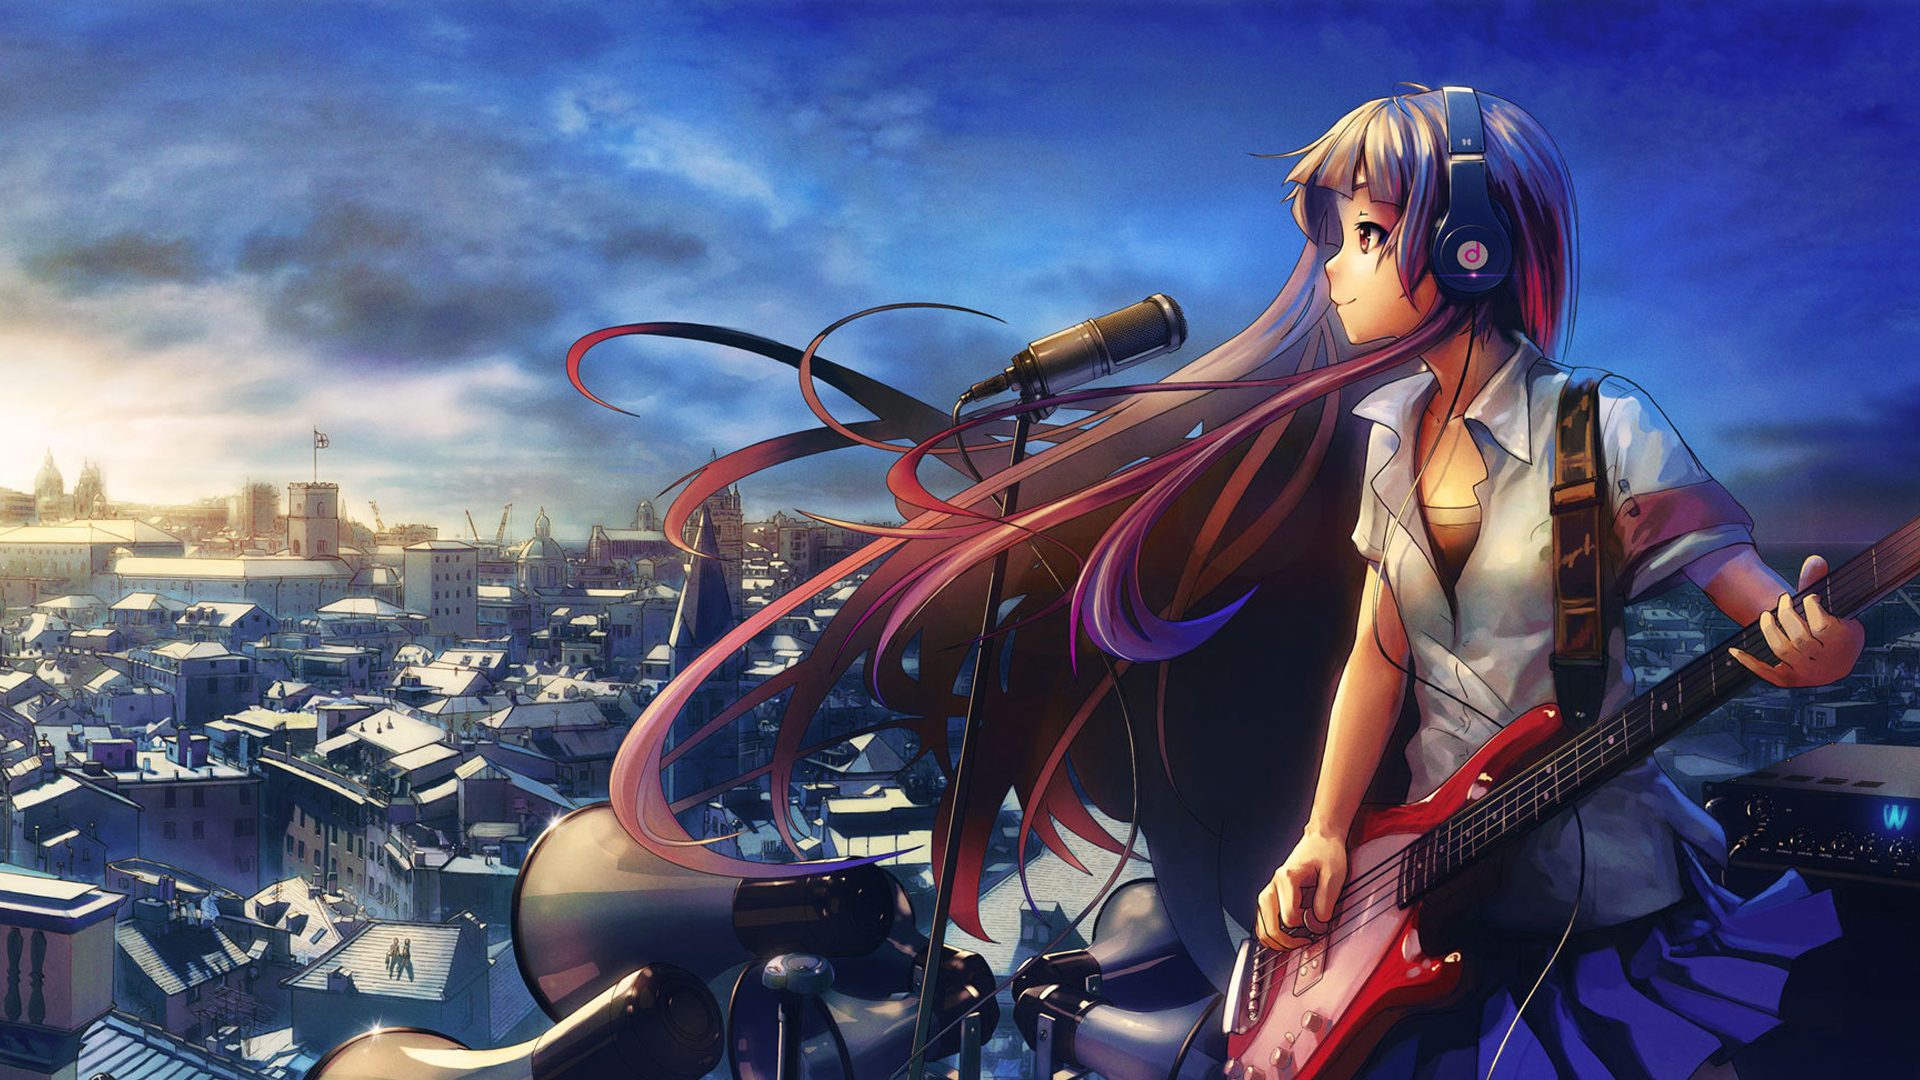 Anime Girl with guitar Full HD wallpaper 1080p Full HD Wallpapers 1920x1080